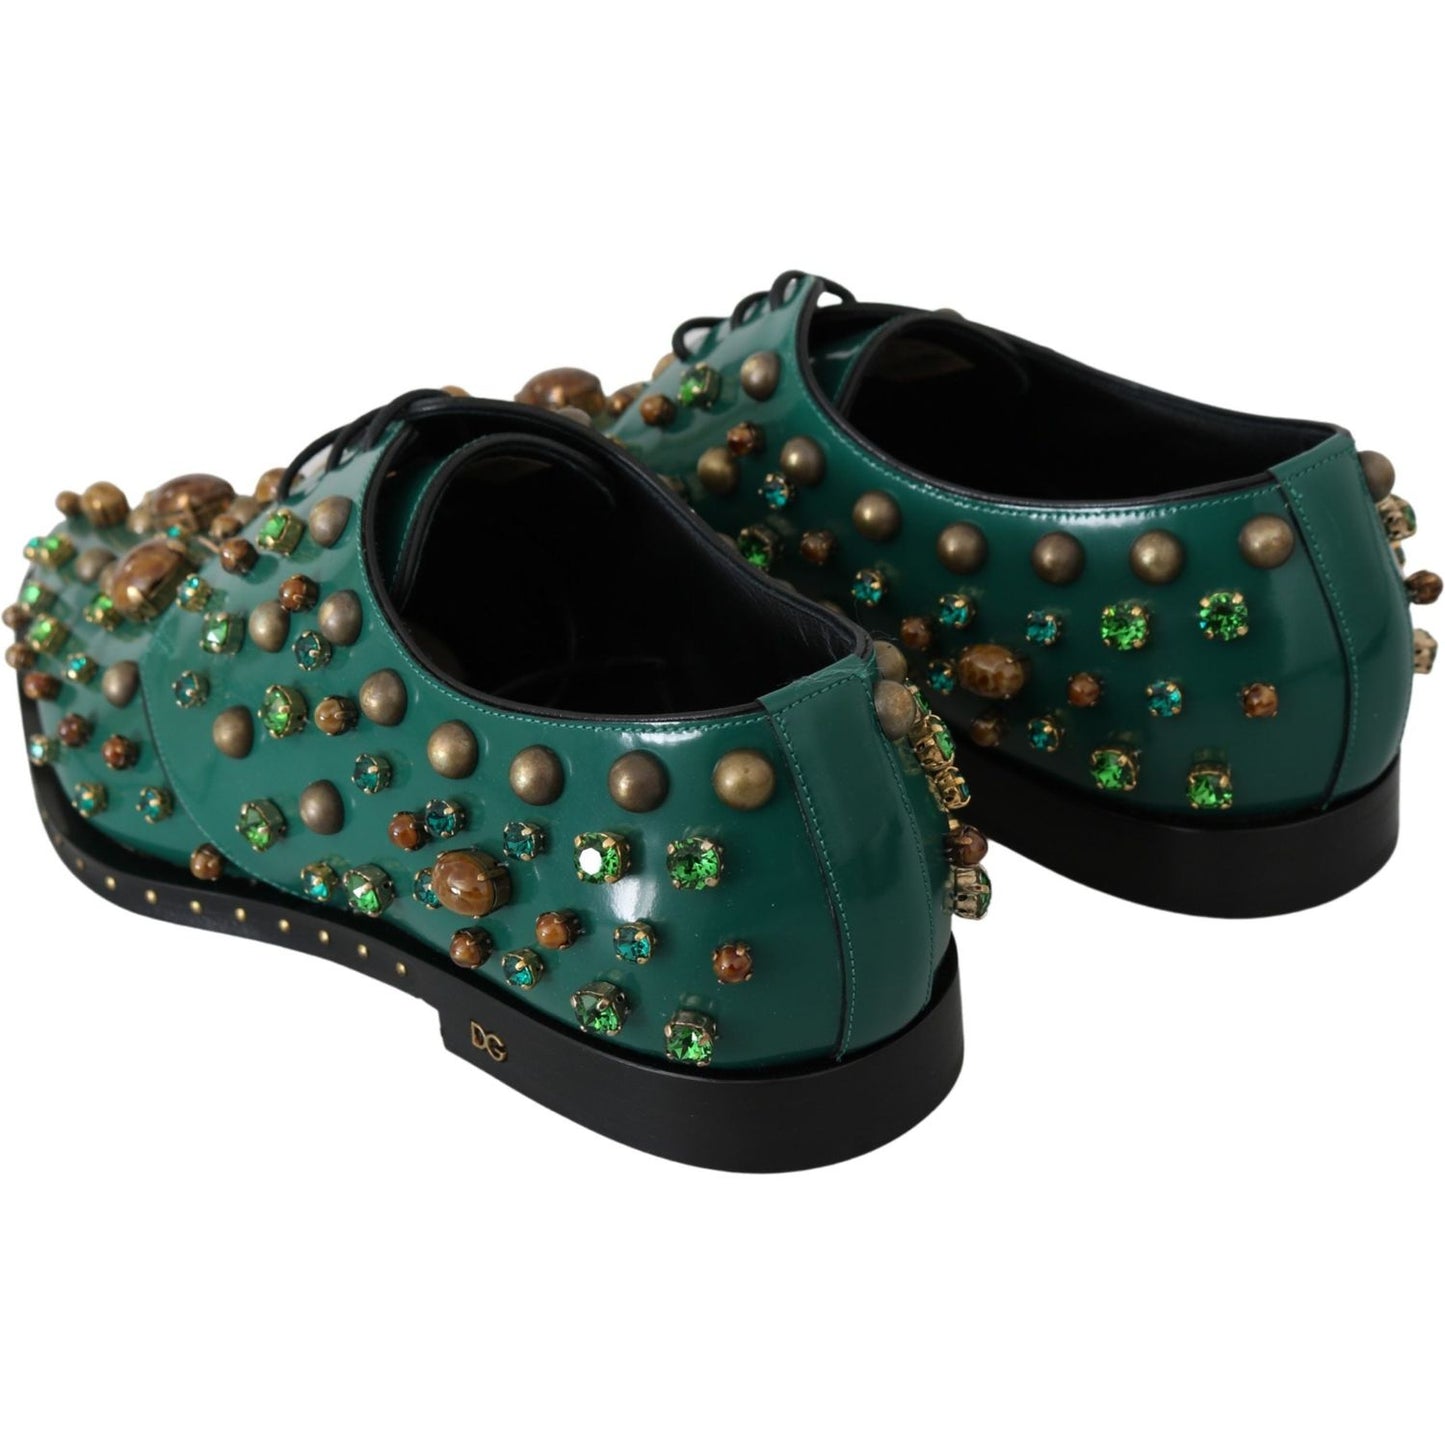 Dolce & Gabbana Emerald Leather Dress Shoes with Crystal Accents green-leather-crystal-dress-broque-shoes IMG_1565-scaled-68da8890-89d.jpg